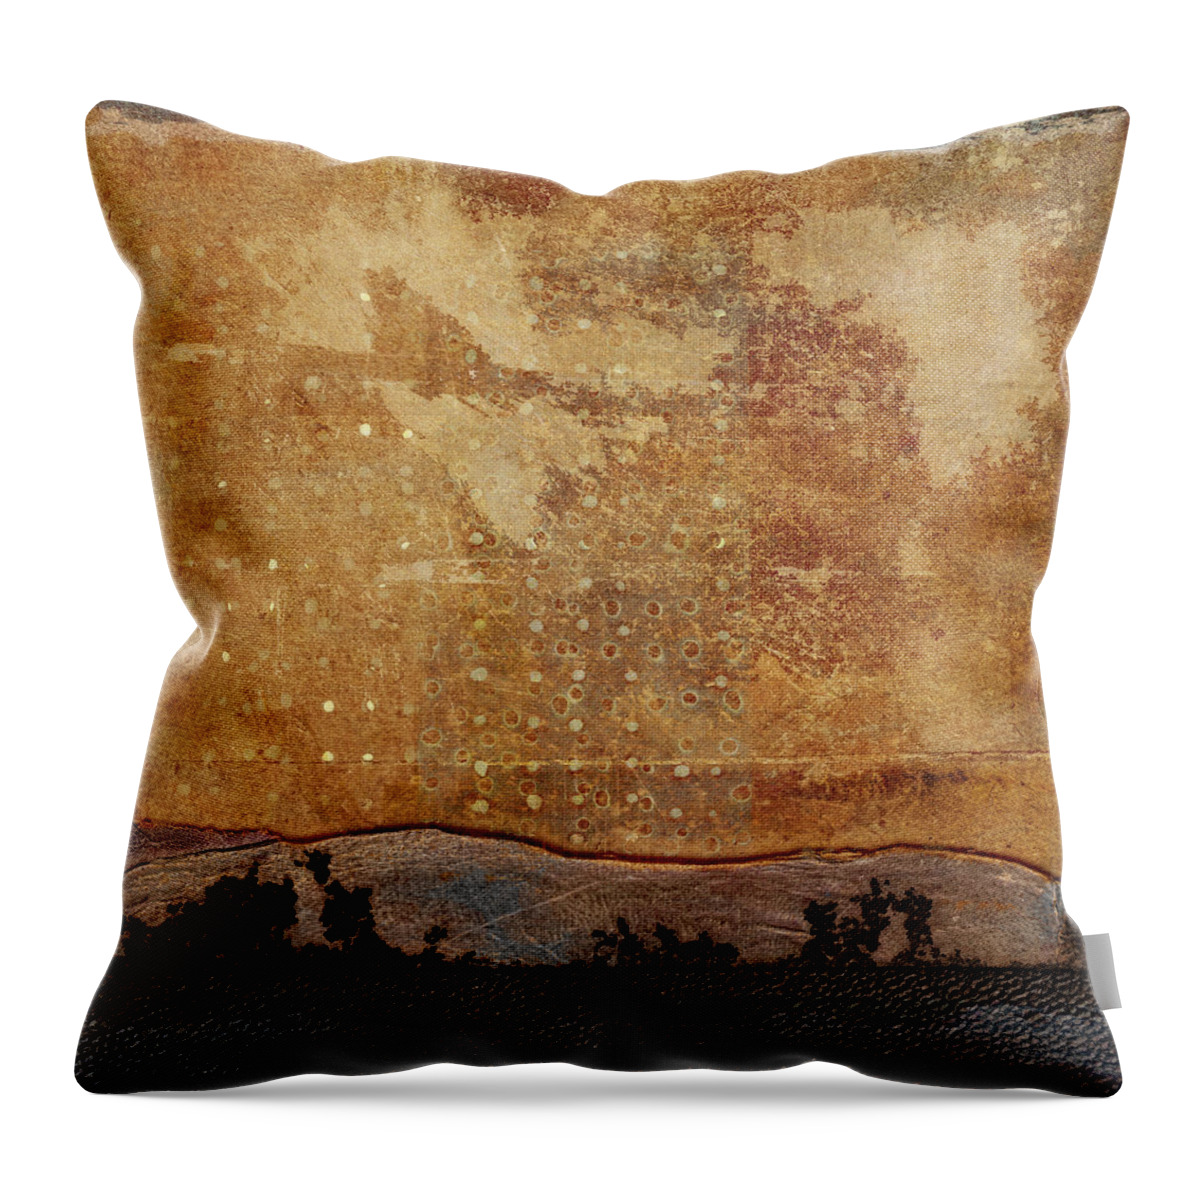 West Throw Pillow featuring the photograph Heading West by Carol Leigh